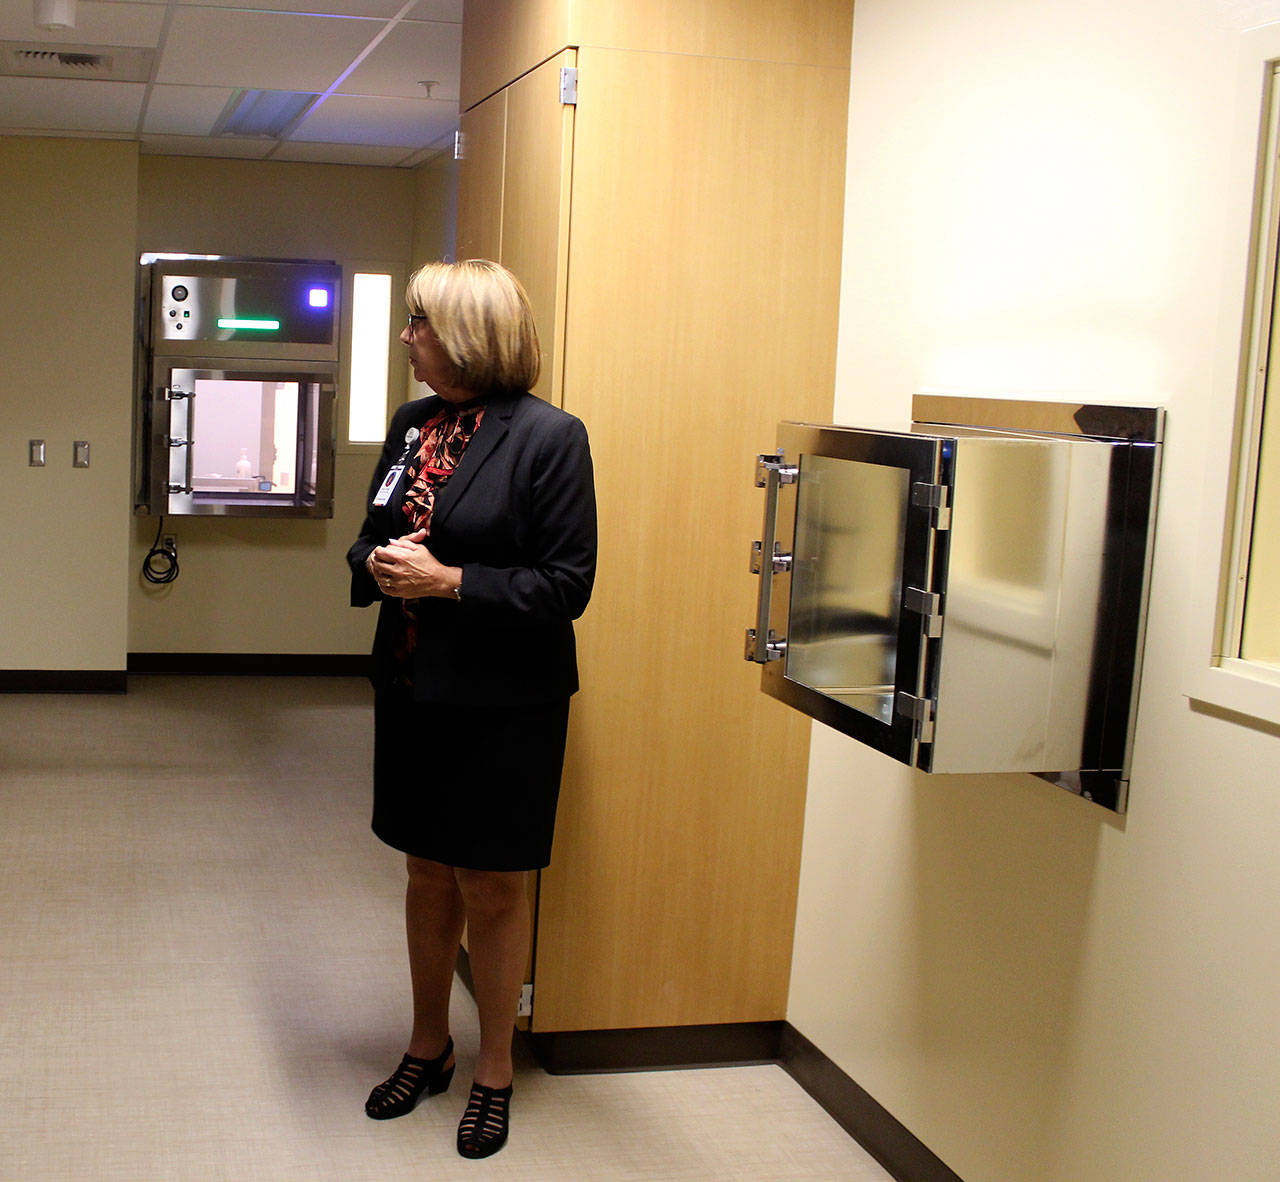 WhidbeyHealth CEO Geri Forbes gives a tour of the new pharmacy opening in November. (Photo by Patricia Guthrie/Whidbey News Group)